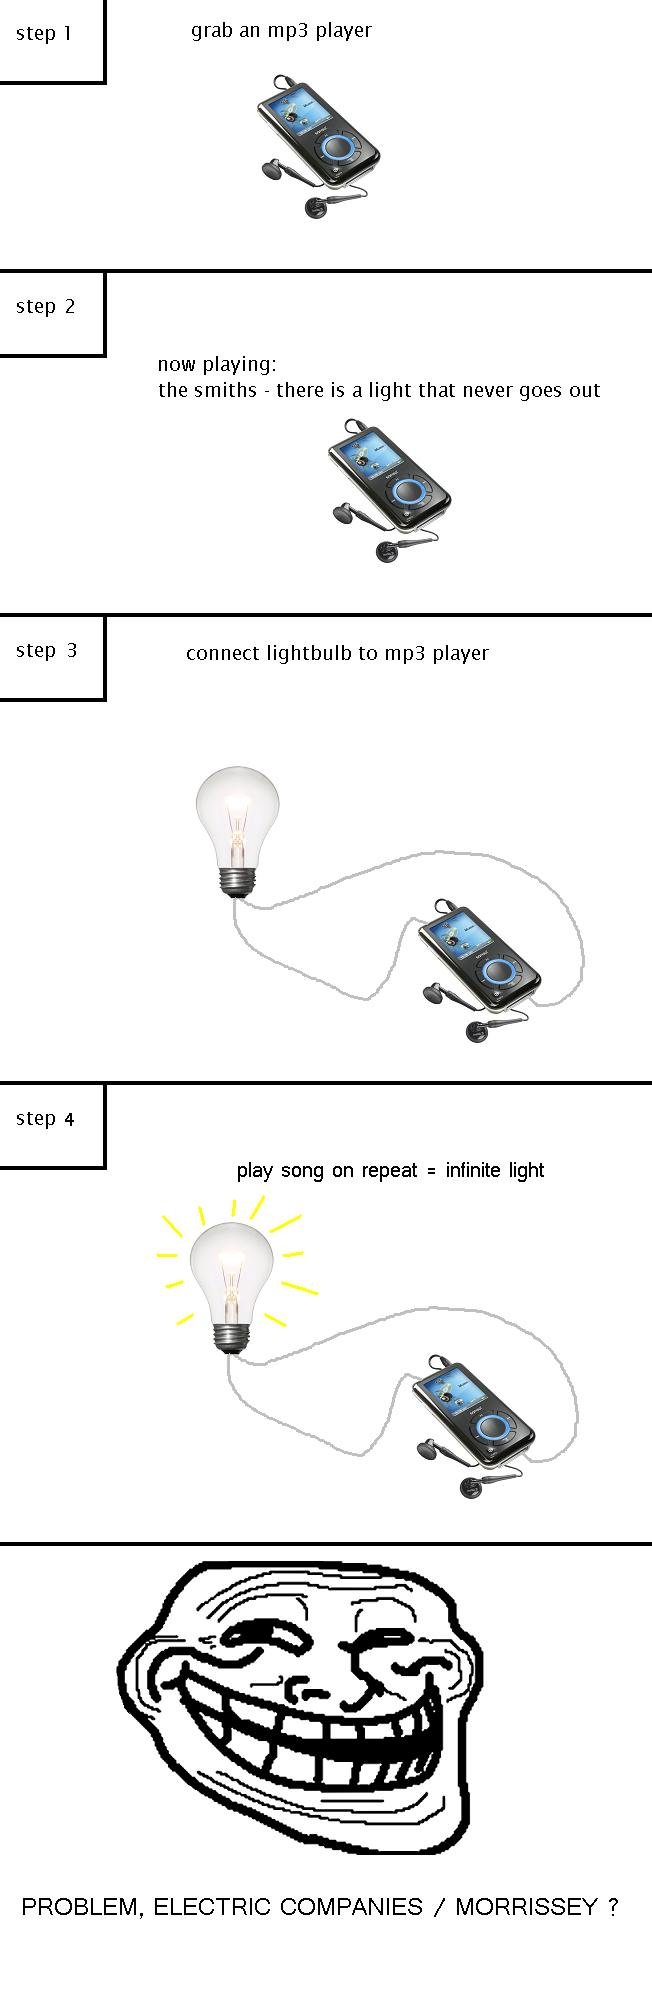 Troll Physics. U Mad FJ?. step 1 grab an mpa player step 2 new playing: the smiths - there is a light that never goes out step 3 connect lightbulb to mpa player